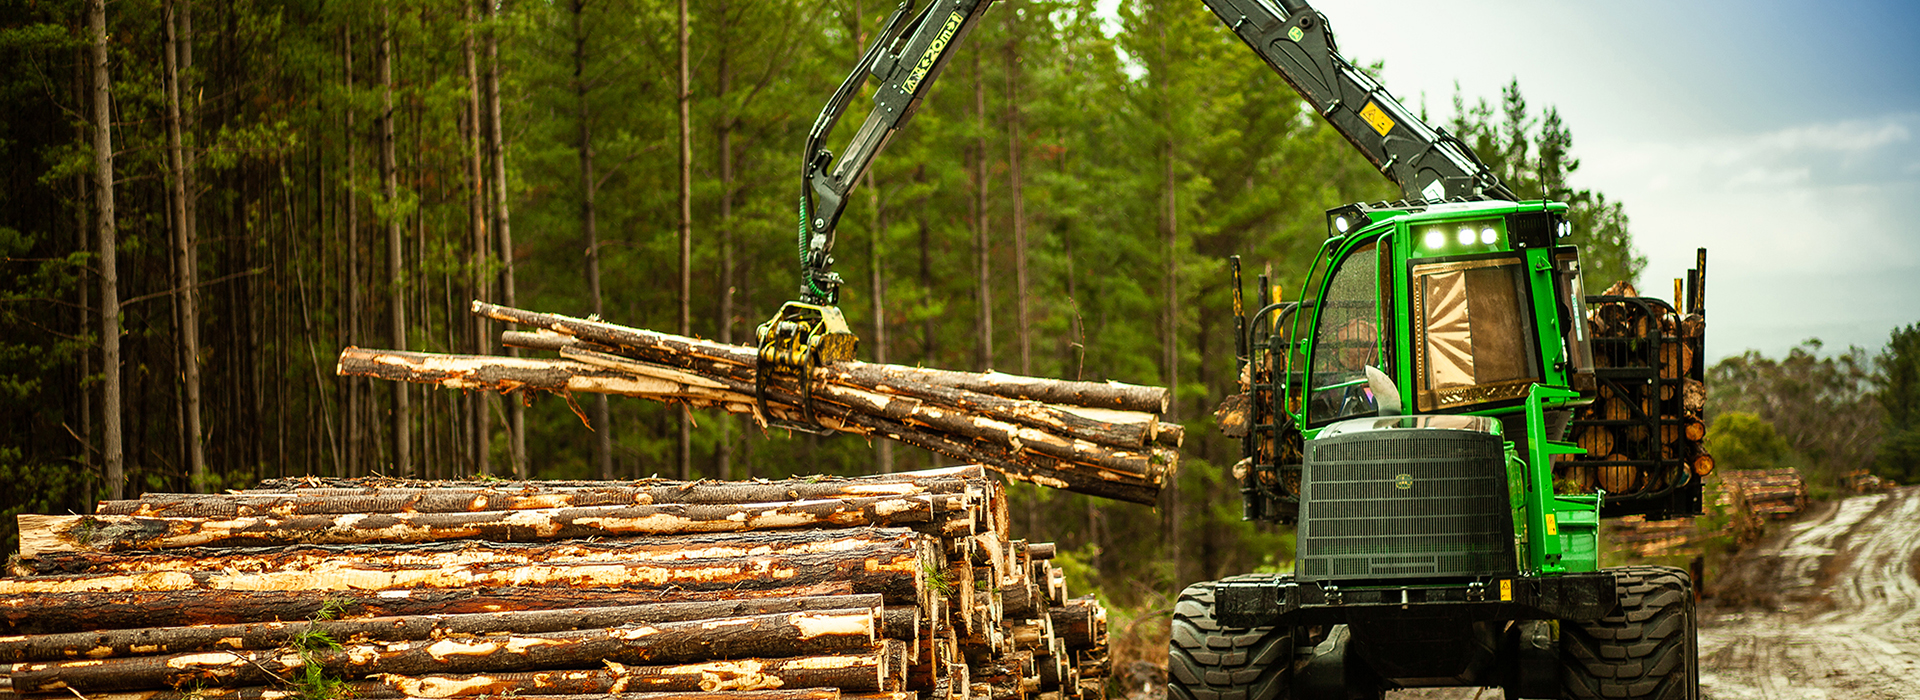 Forest Industry and Global Supply Chains